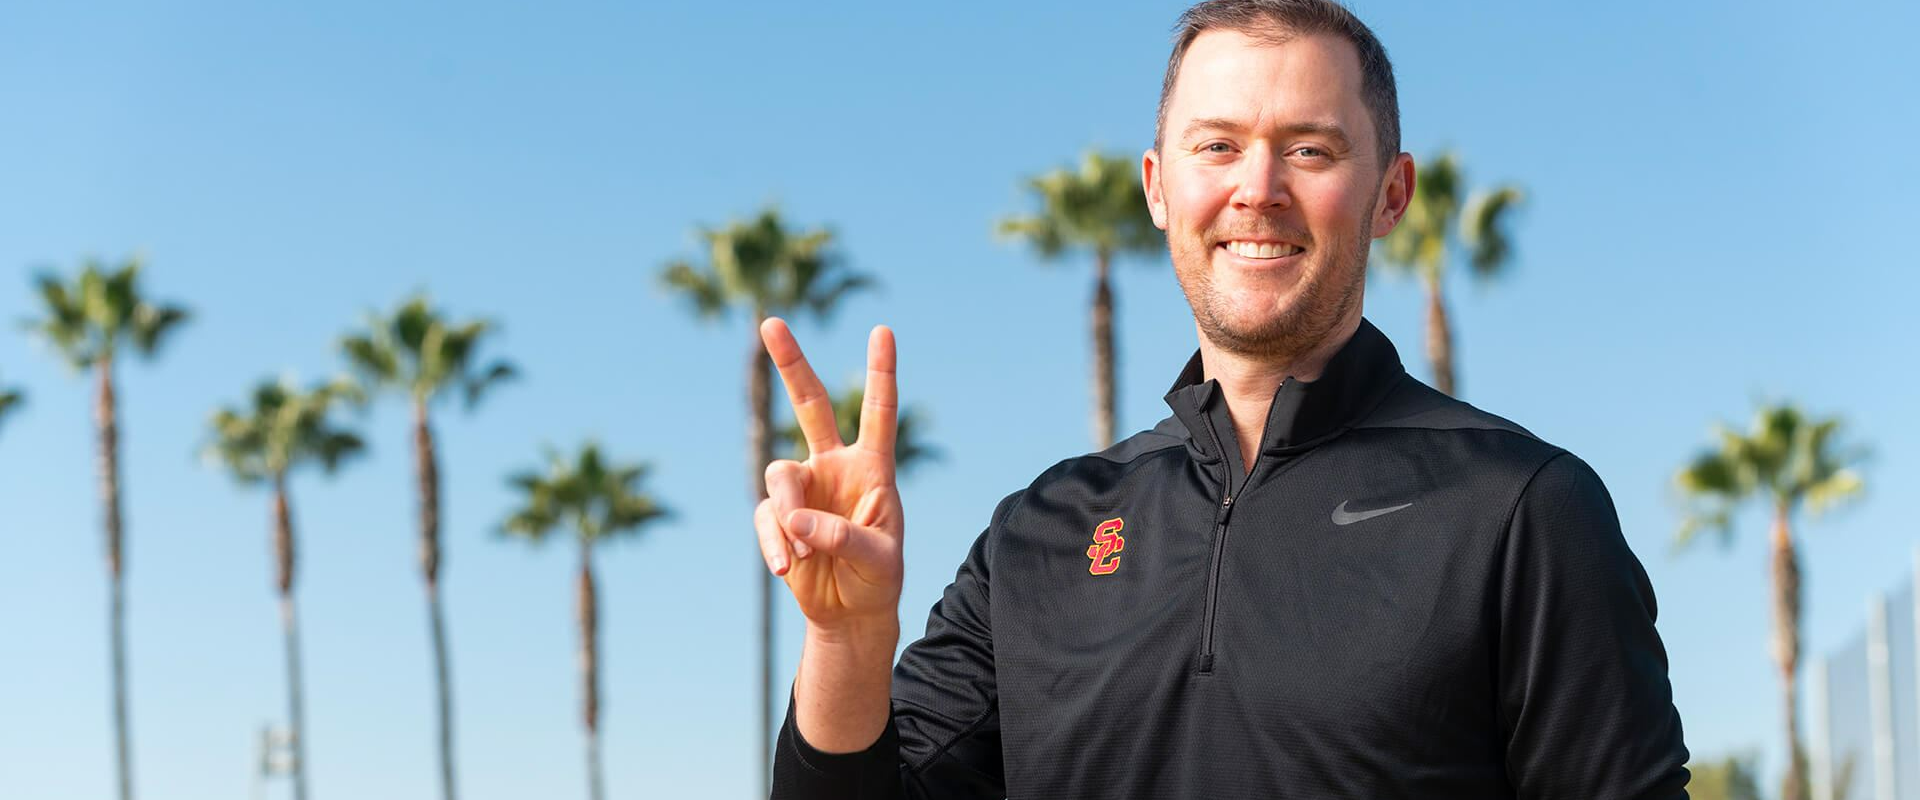 Can USC Restore the PAC-12?